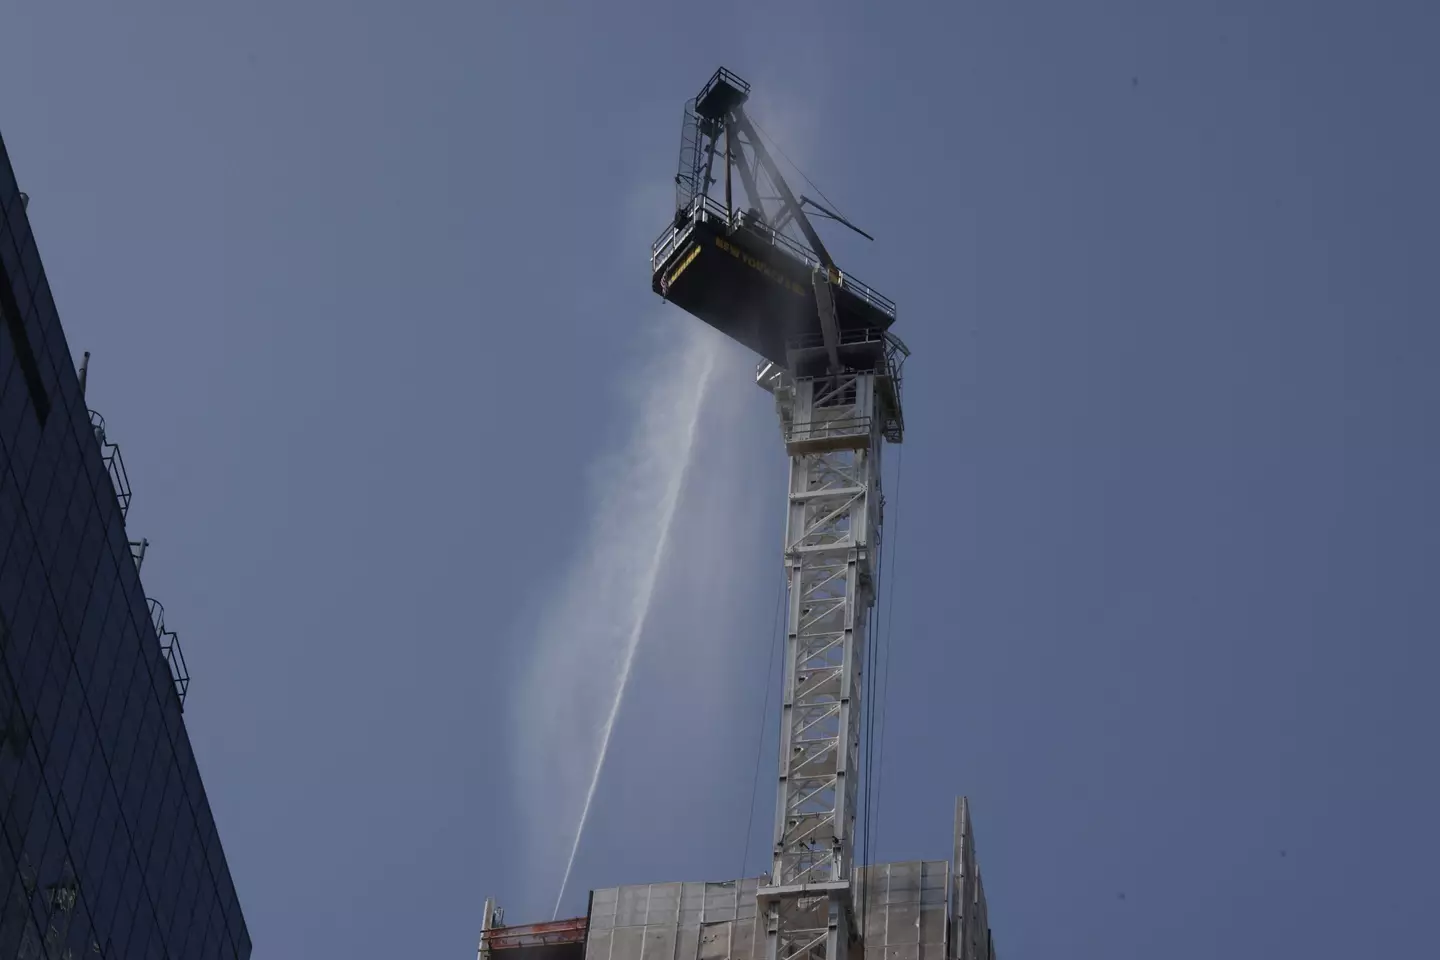 Firefighters worked to put out the broken and burning crane.